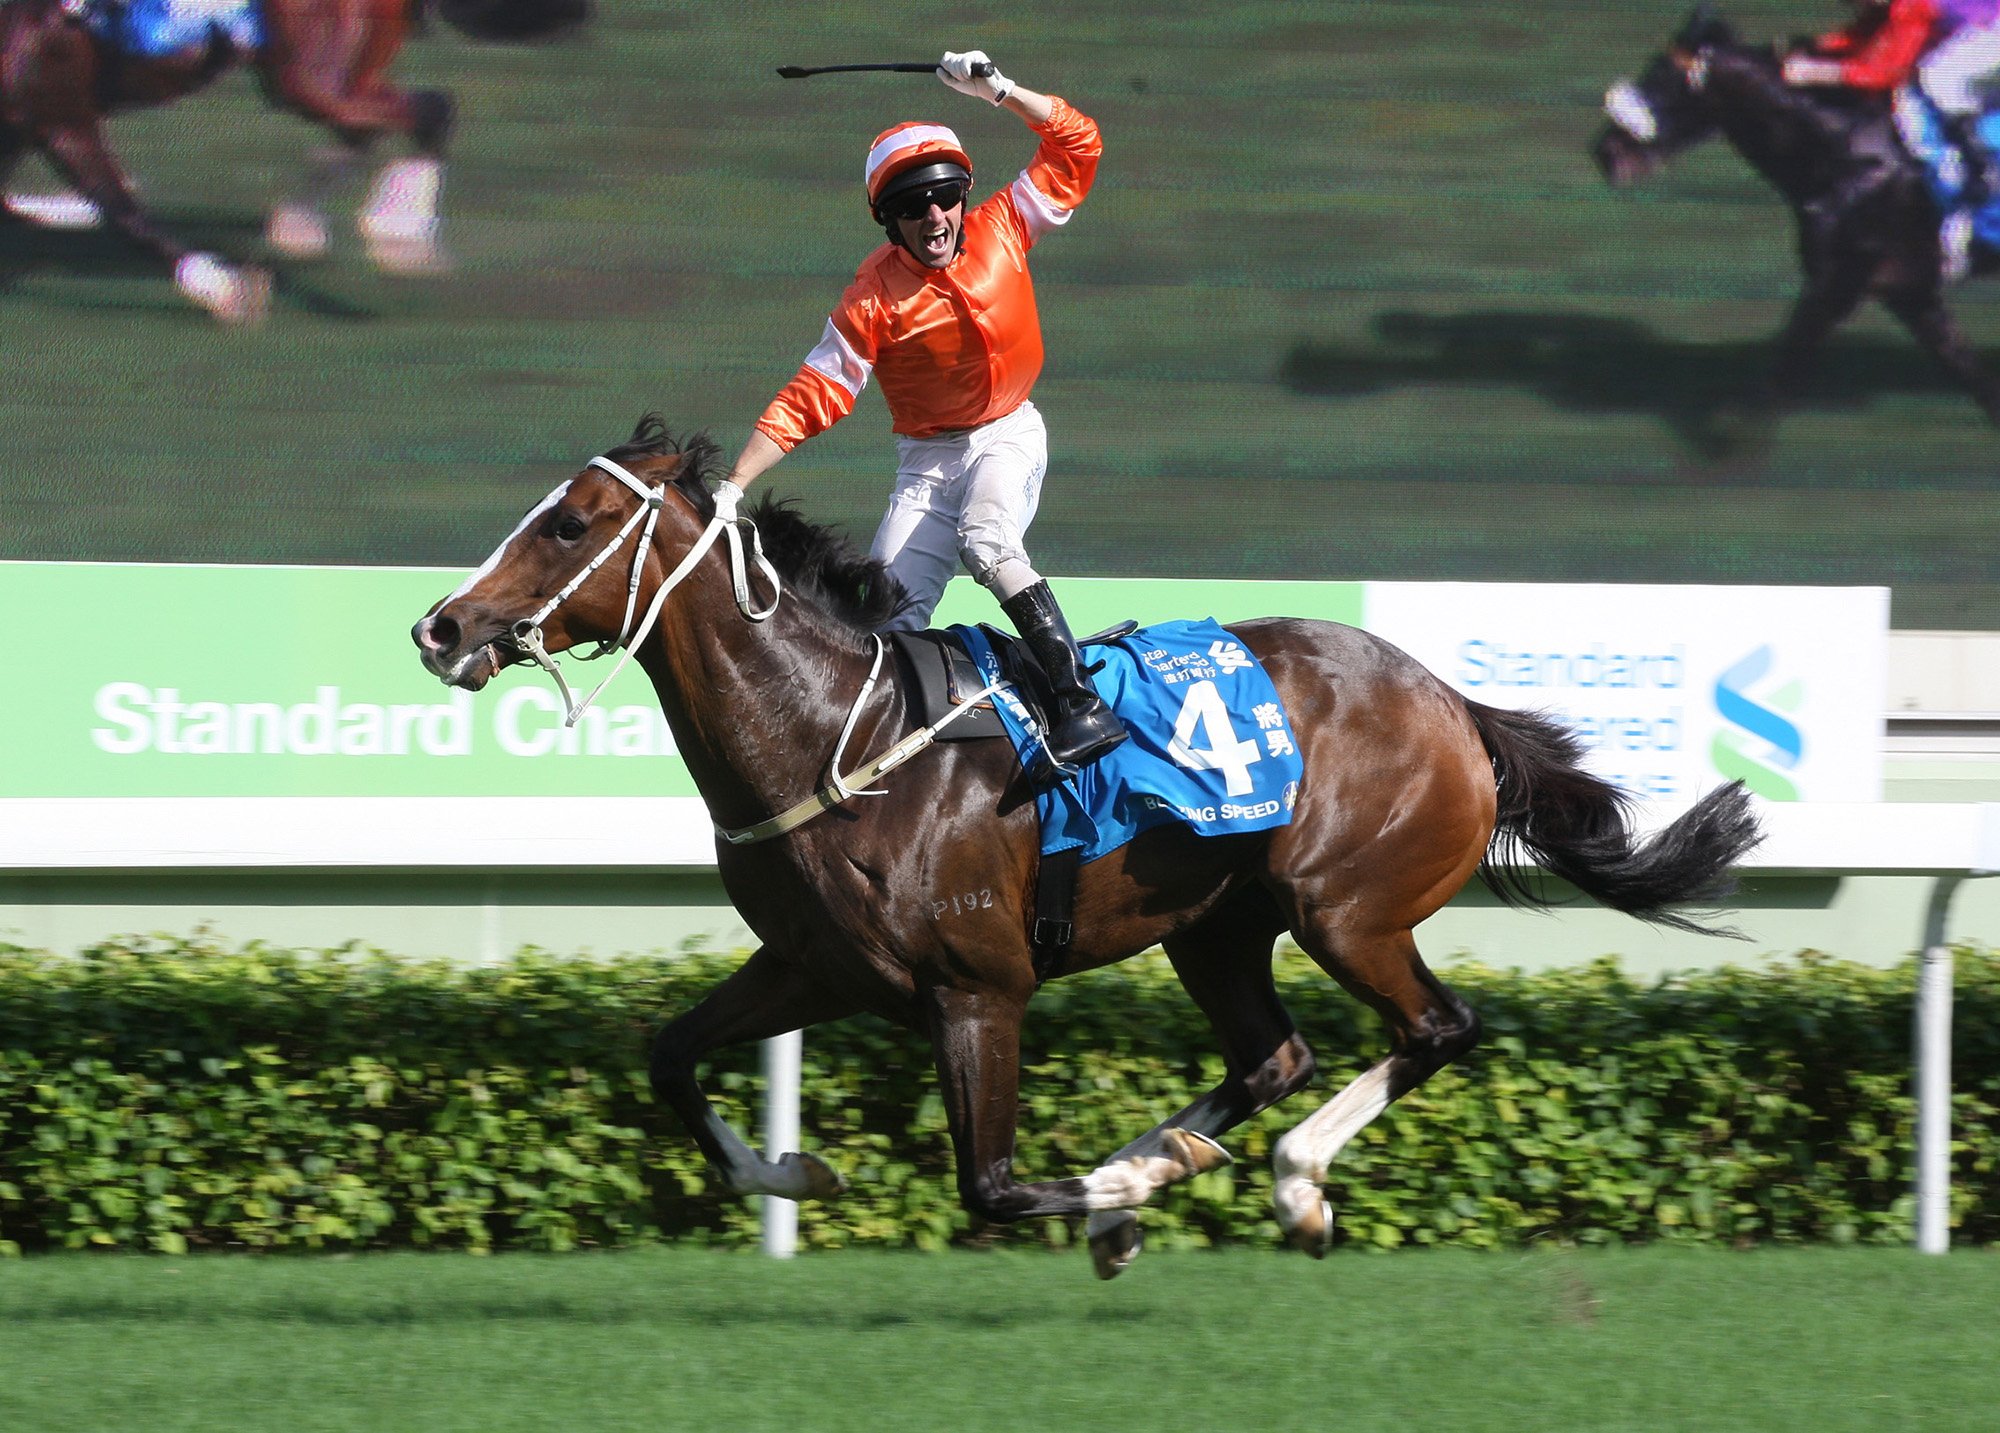 Callan celebrates the win aboard Blazing Speed in the 2014 Standard Chartered Champions & Chater Cup.